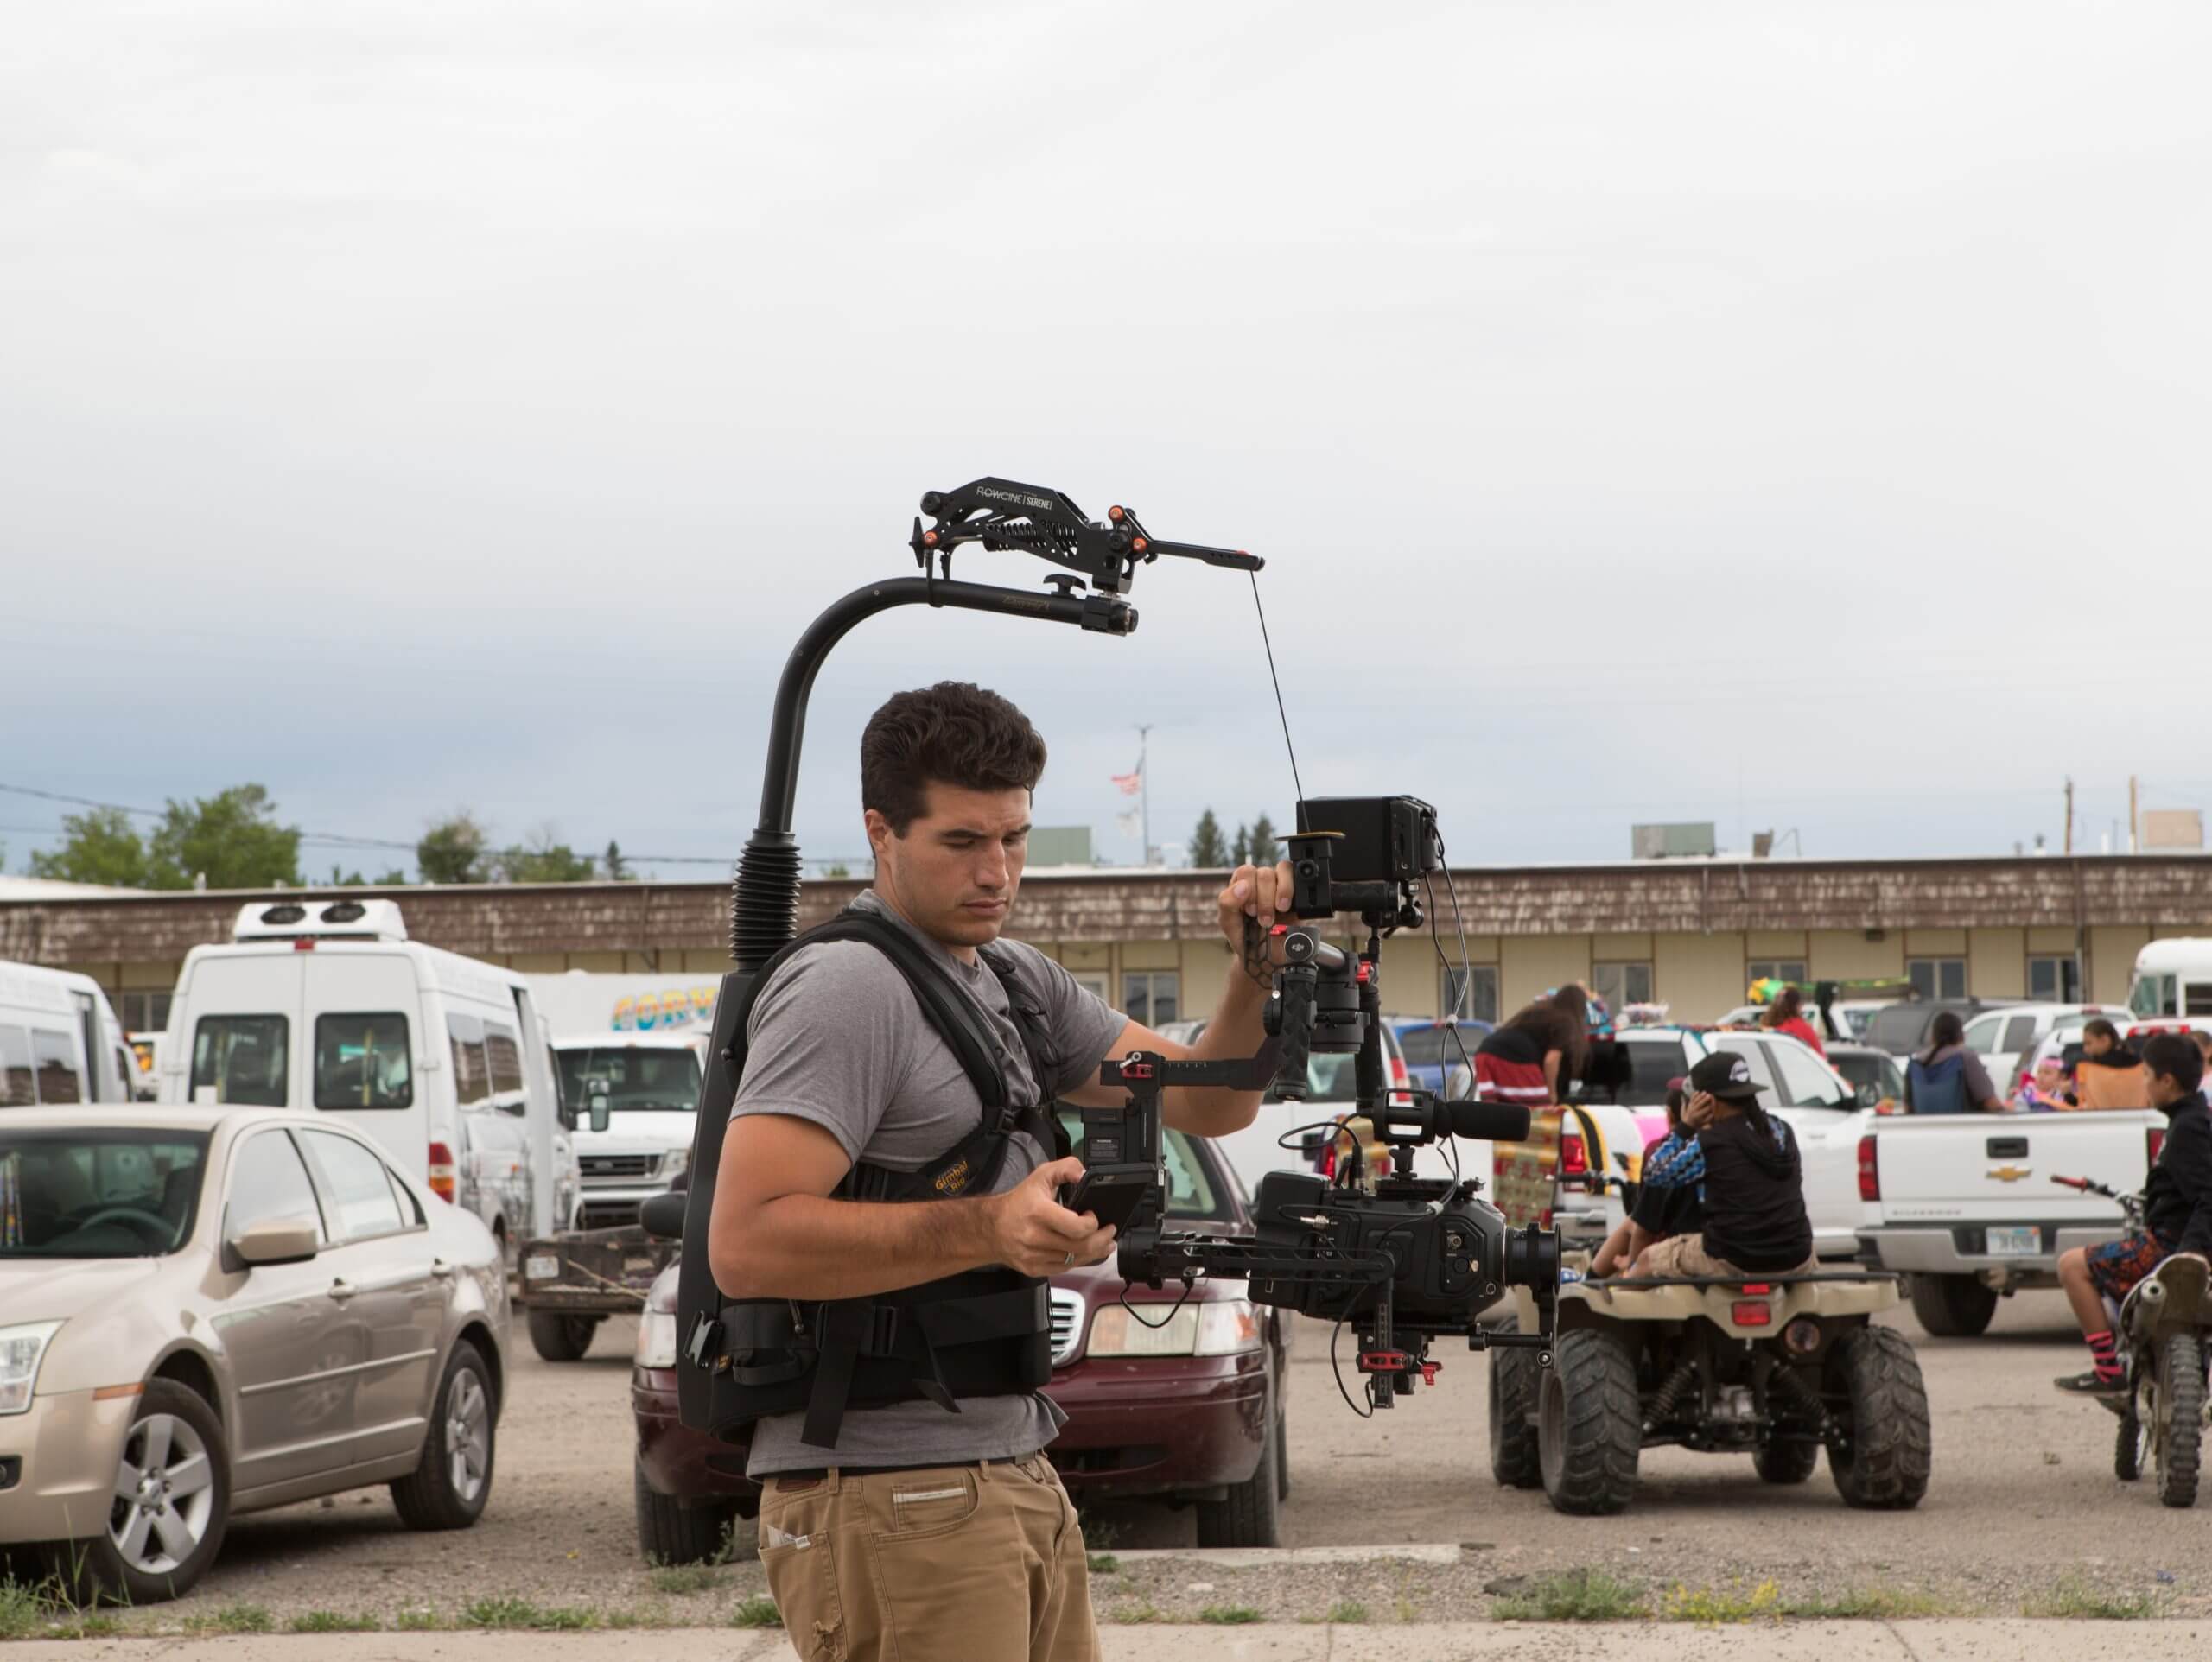 A cameraperson holds a camera harness, in the background cars and trucks are parked, there is a motorcycle with children looking at something